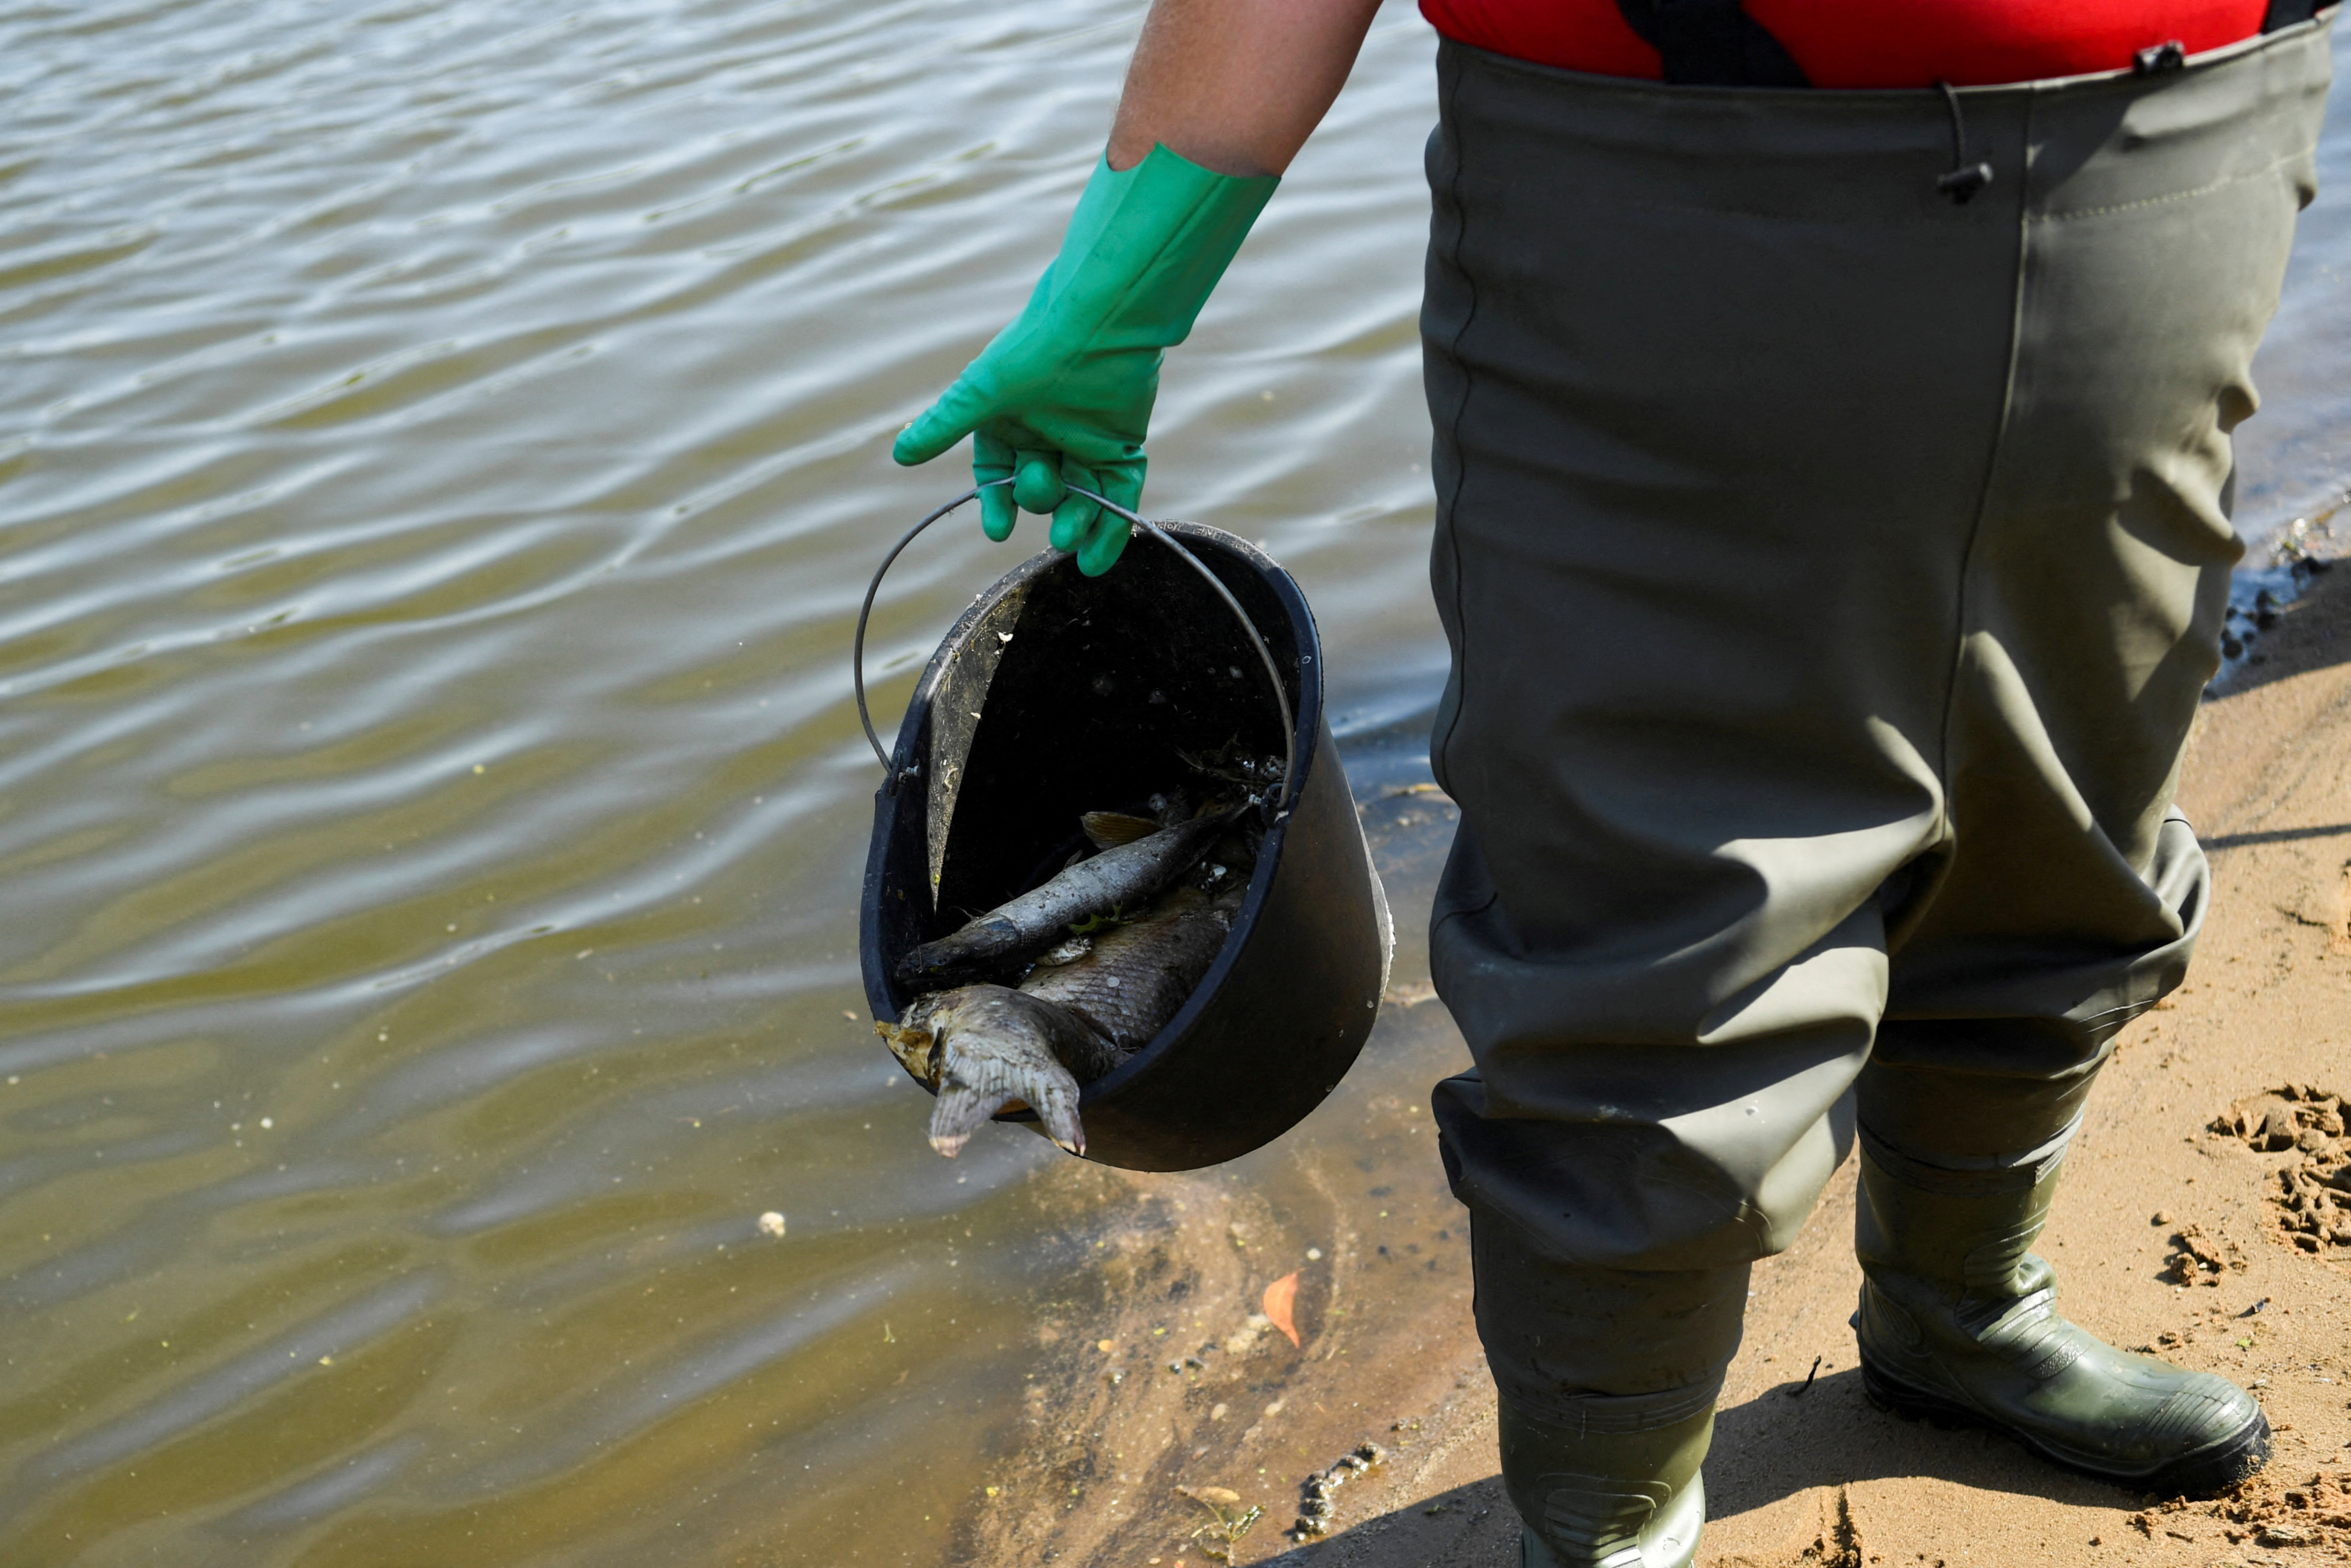 German authorities look for the cause of mysterious fish deaths